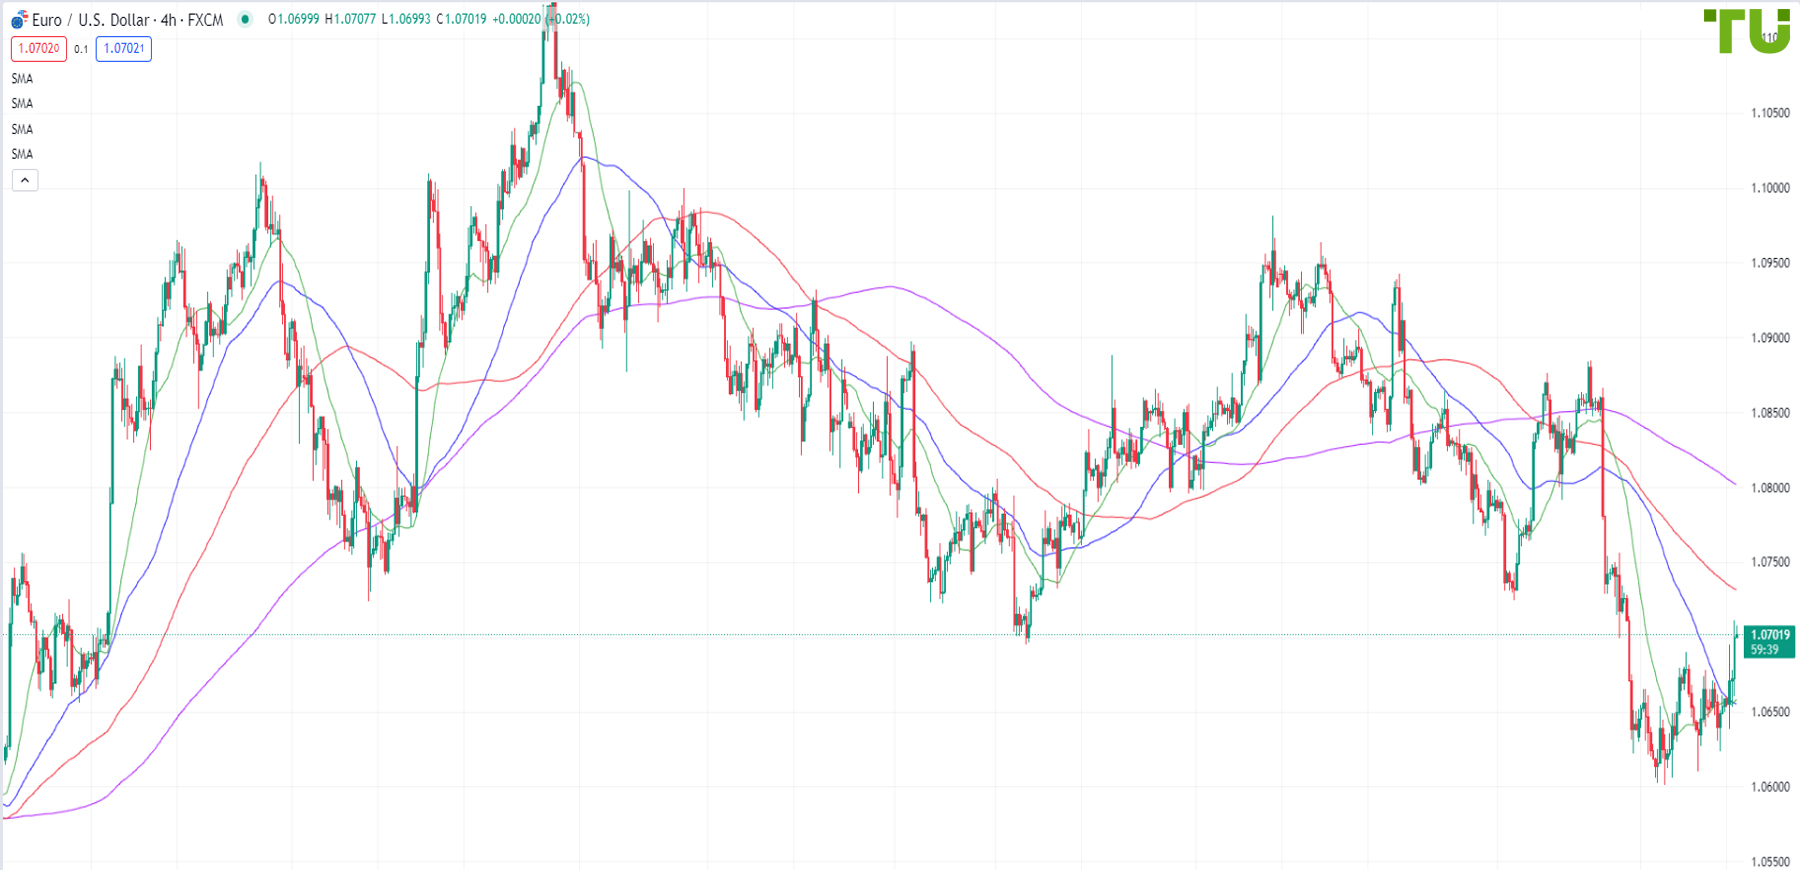 EUR/USD tries to develop a recovery